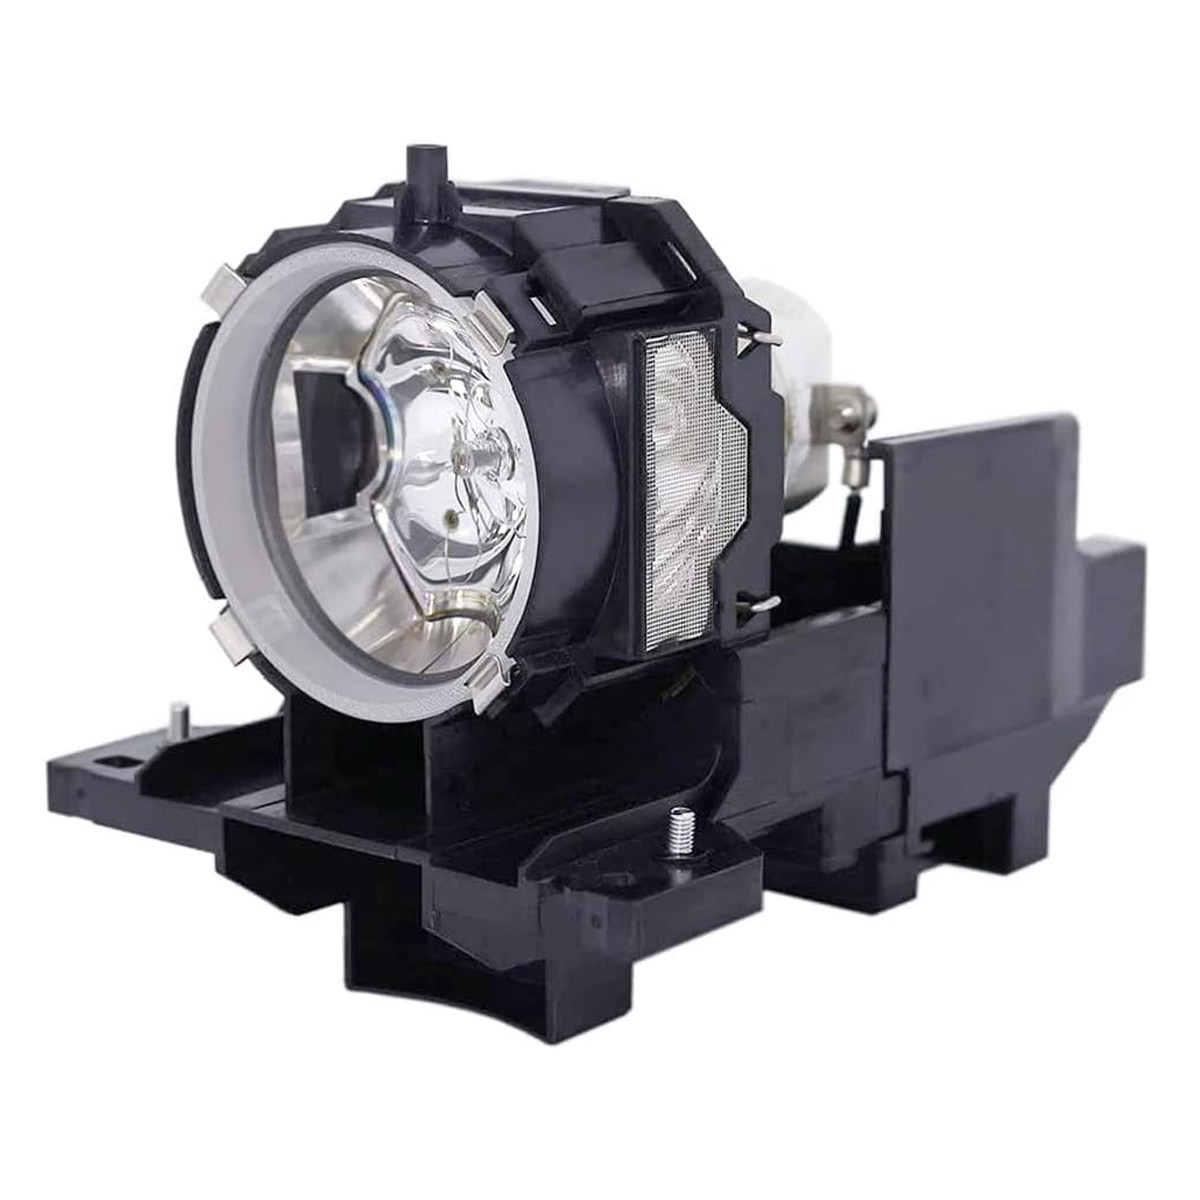 Replacement Projector lamp SP-LAMP-046 For Infocus IN5104 IN5108 IN5110